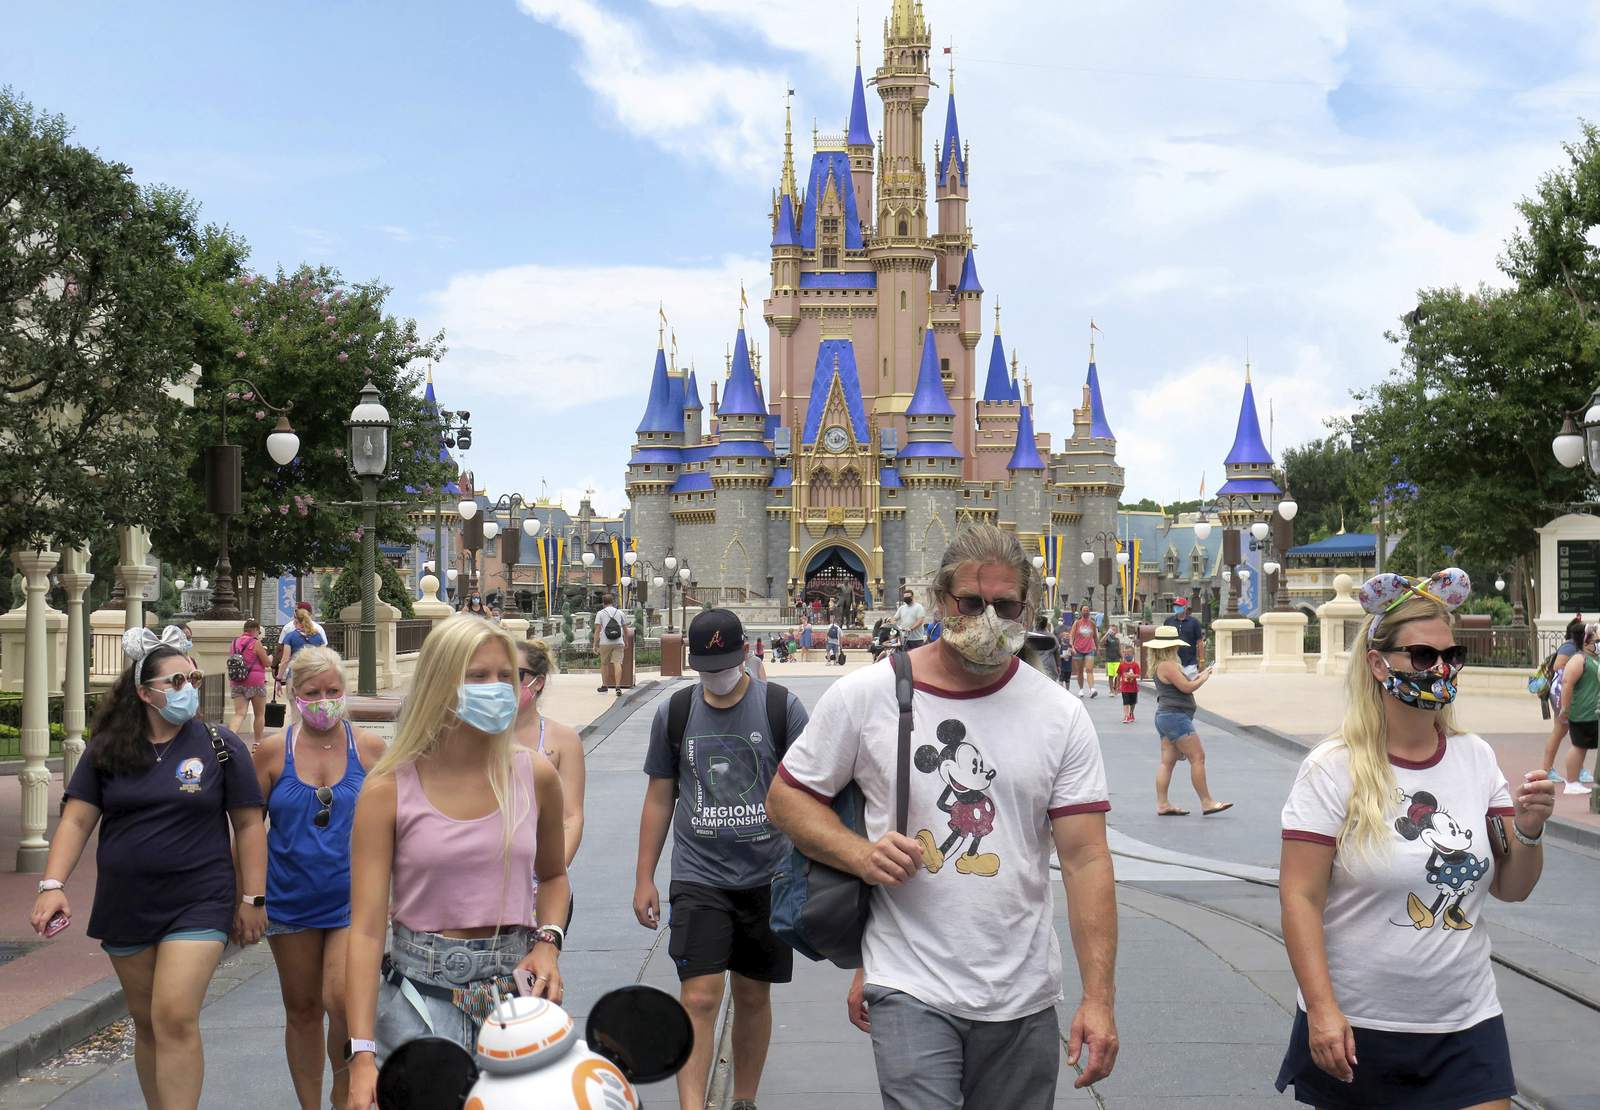 Disney to lay off 28,000 at its parks in California, Florida